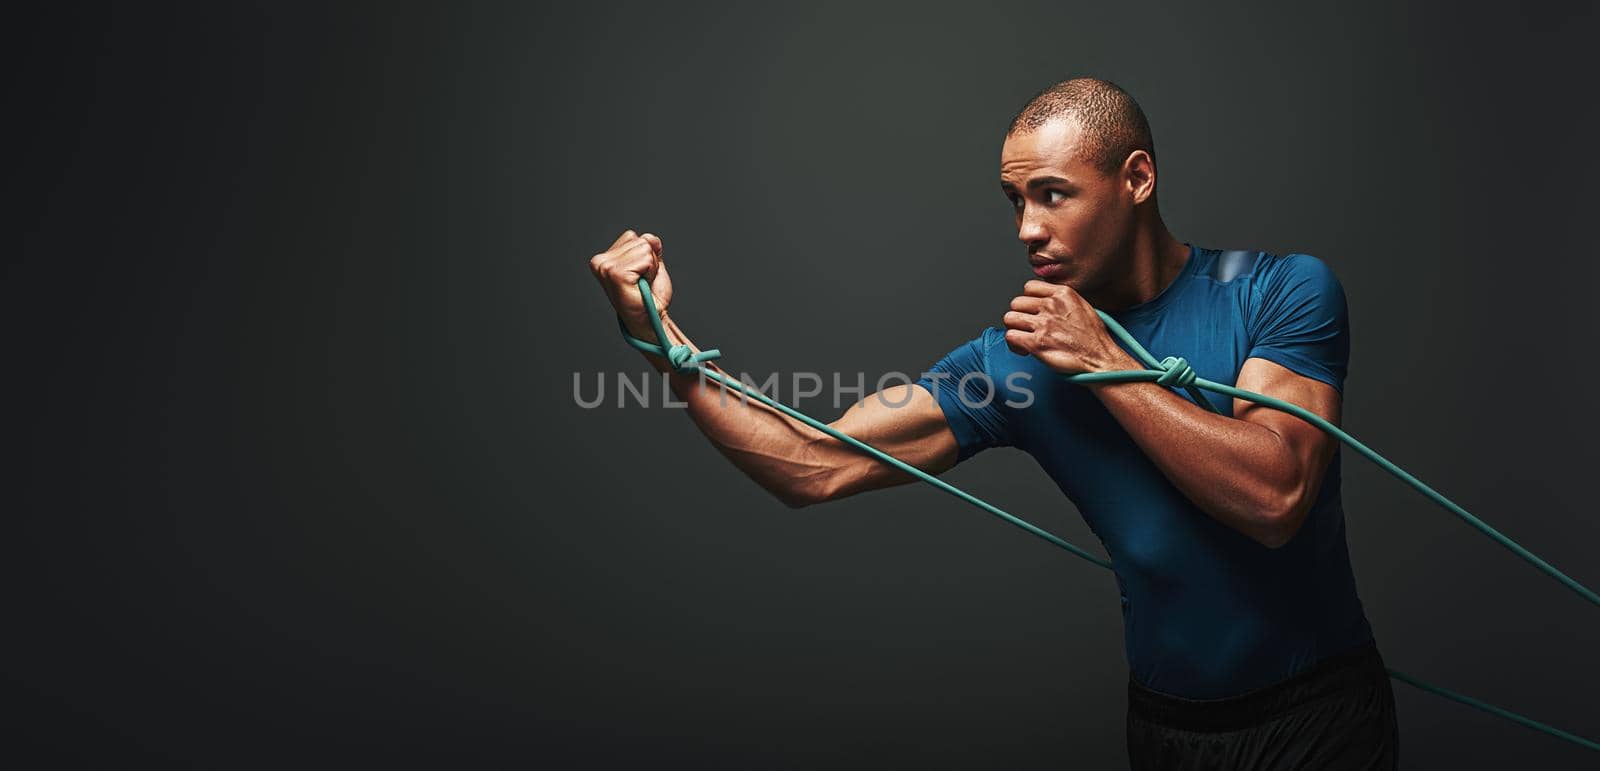 Isolated studio portrait of clean shaven young dark skinned male athlete with strong muscular shoulders working out using resistance elastic band, strengthening arm muscles over dark background. Side view